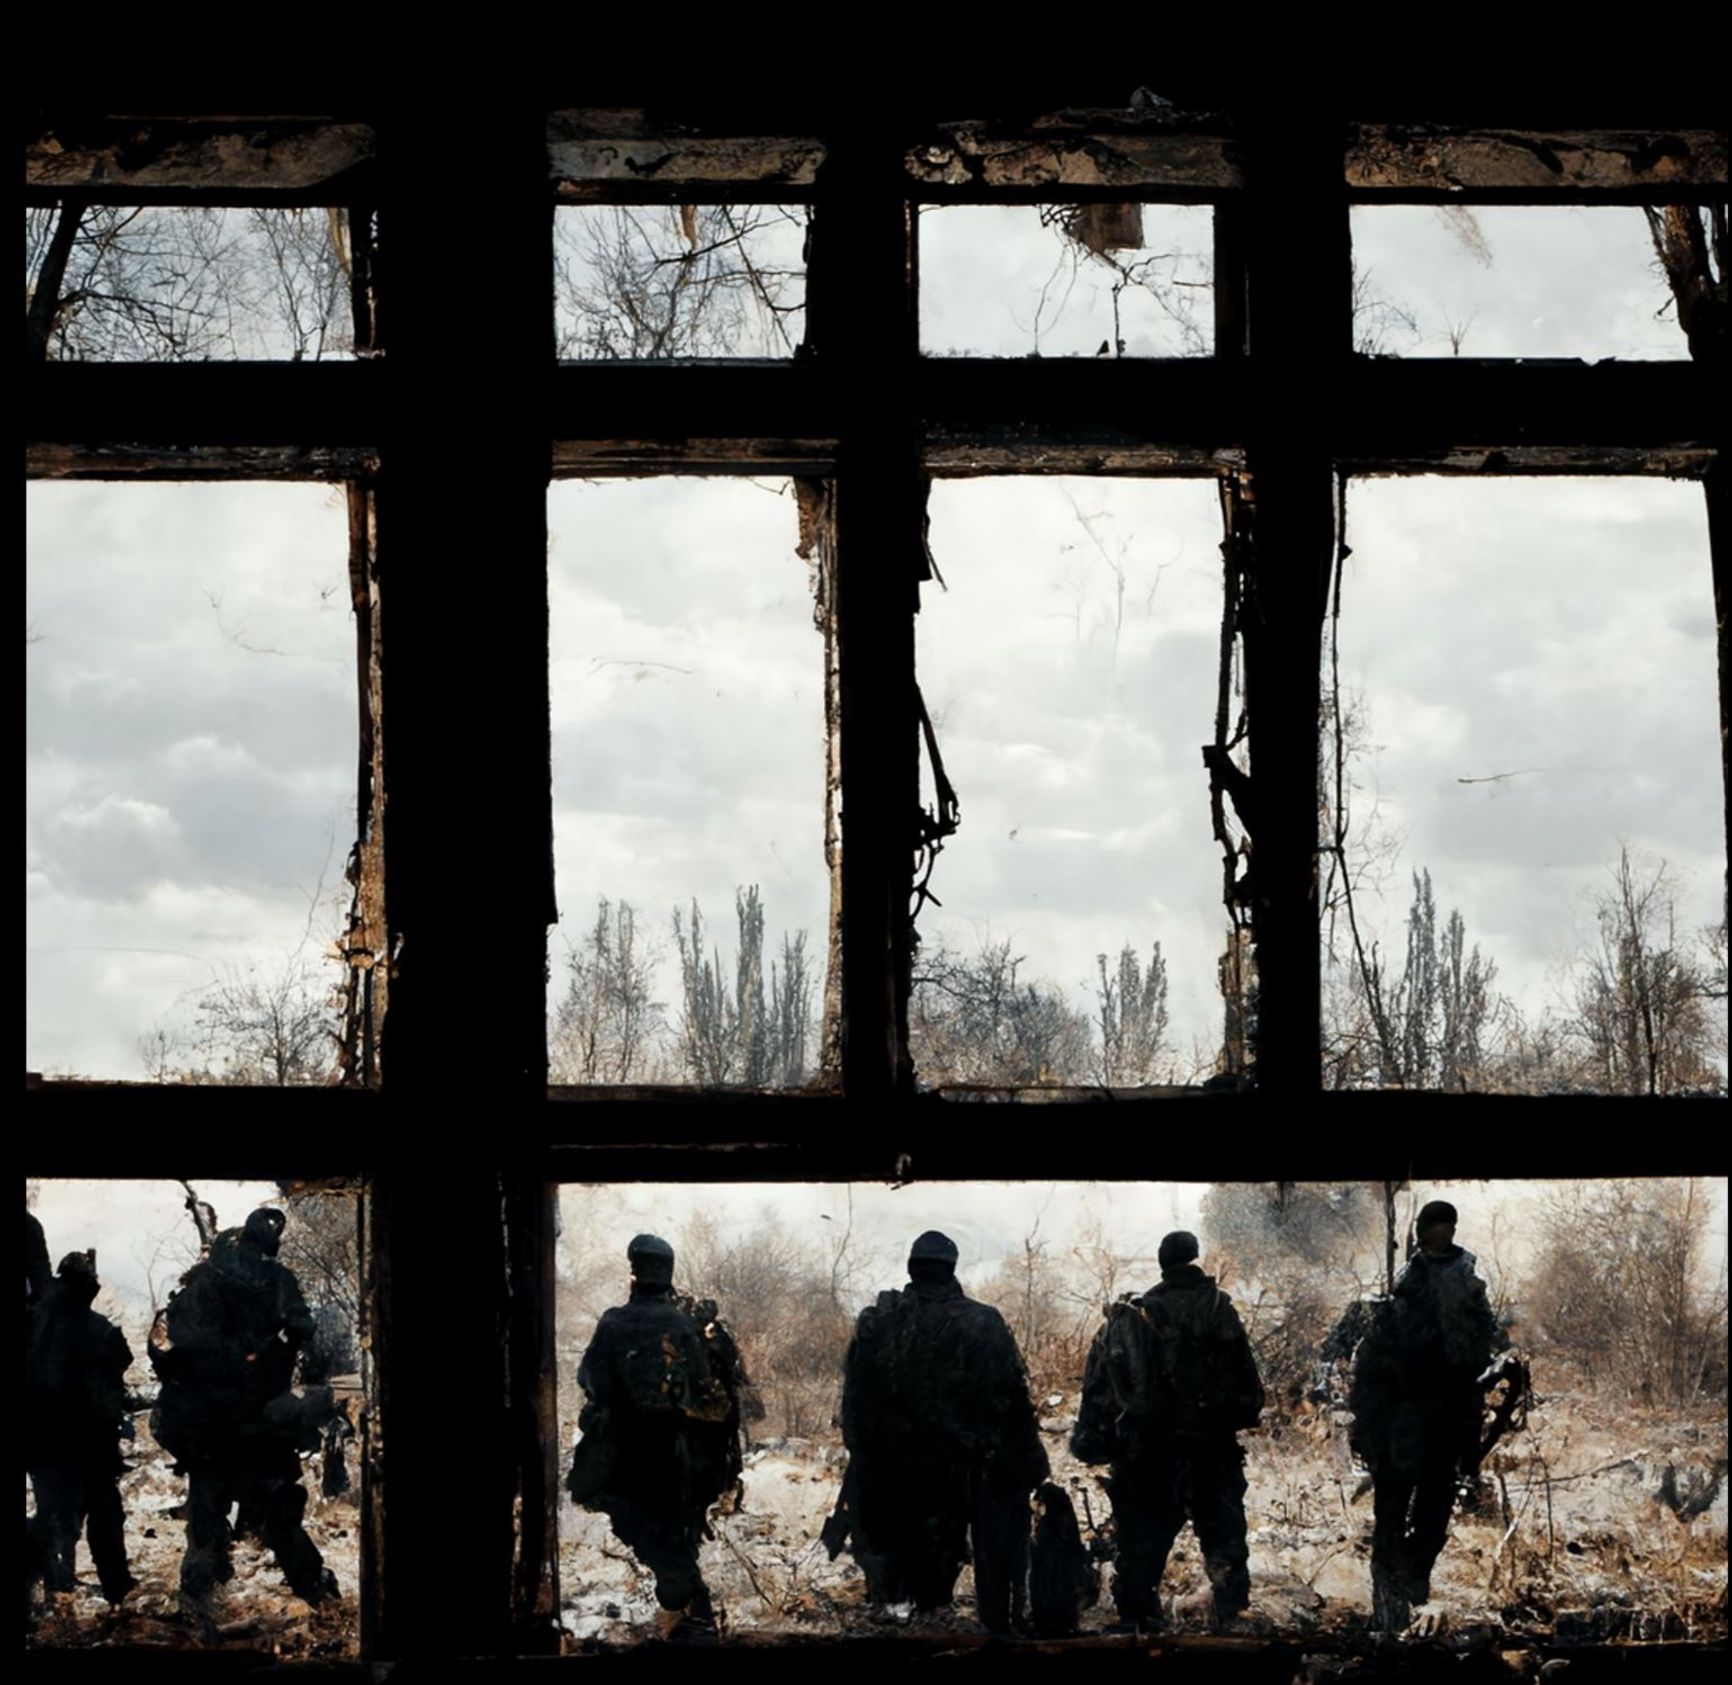 Neural network generated picture: "Merderers are going to fight in Ukraine"